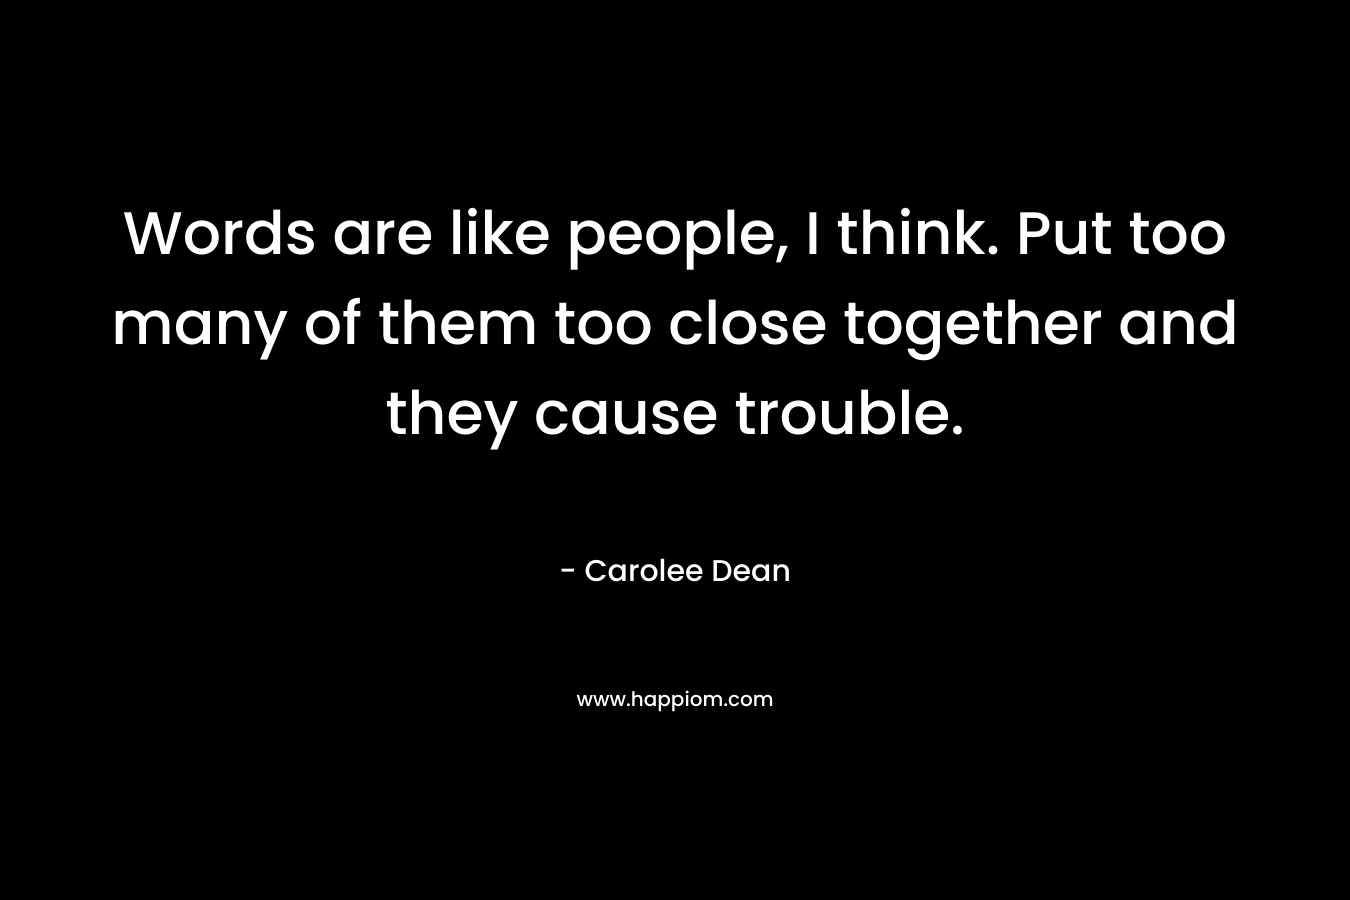 Words are like people, I think. Put too many of them too close together and they cause trouble.